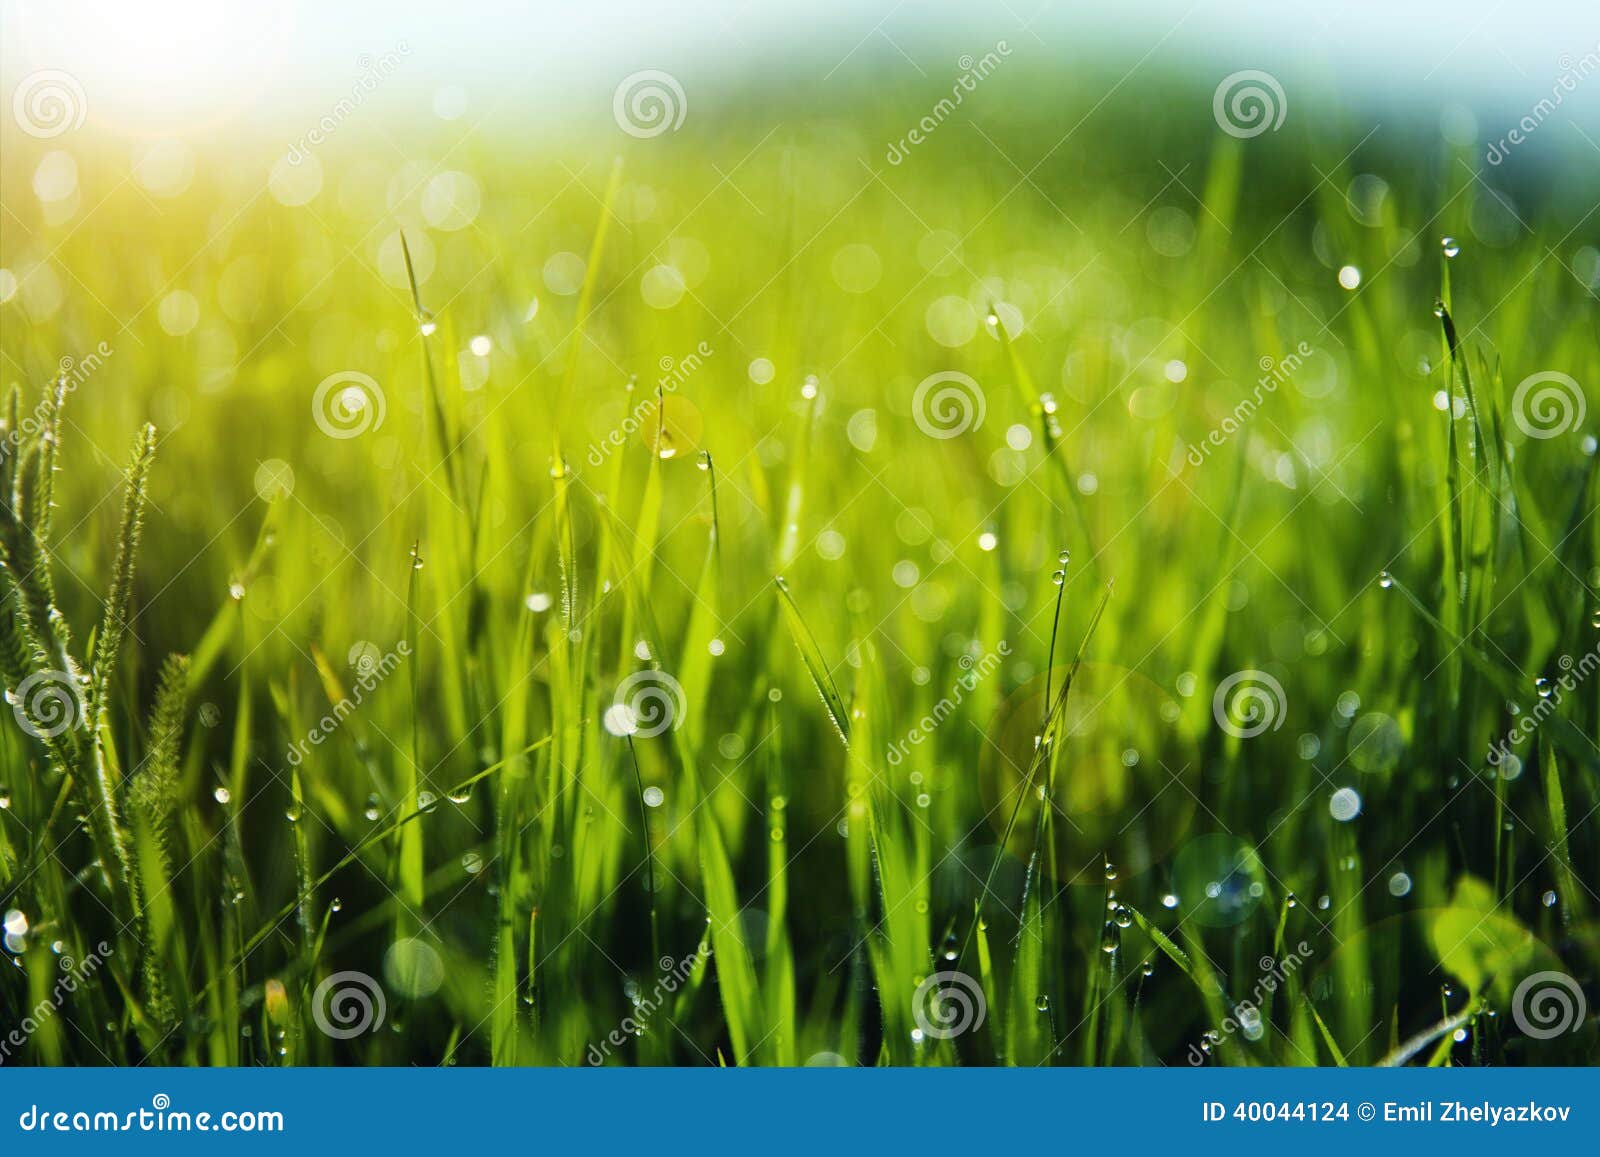 grass with morning dew drops